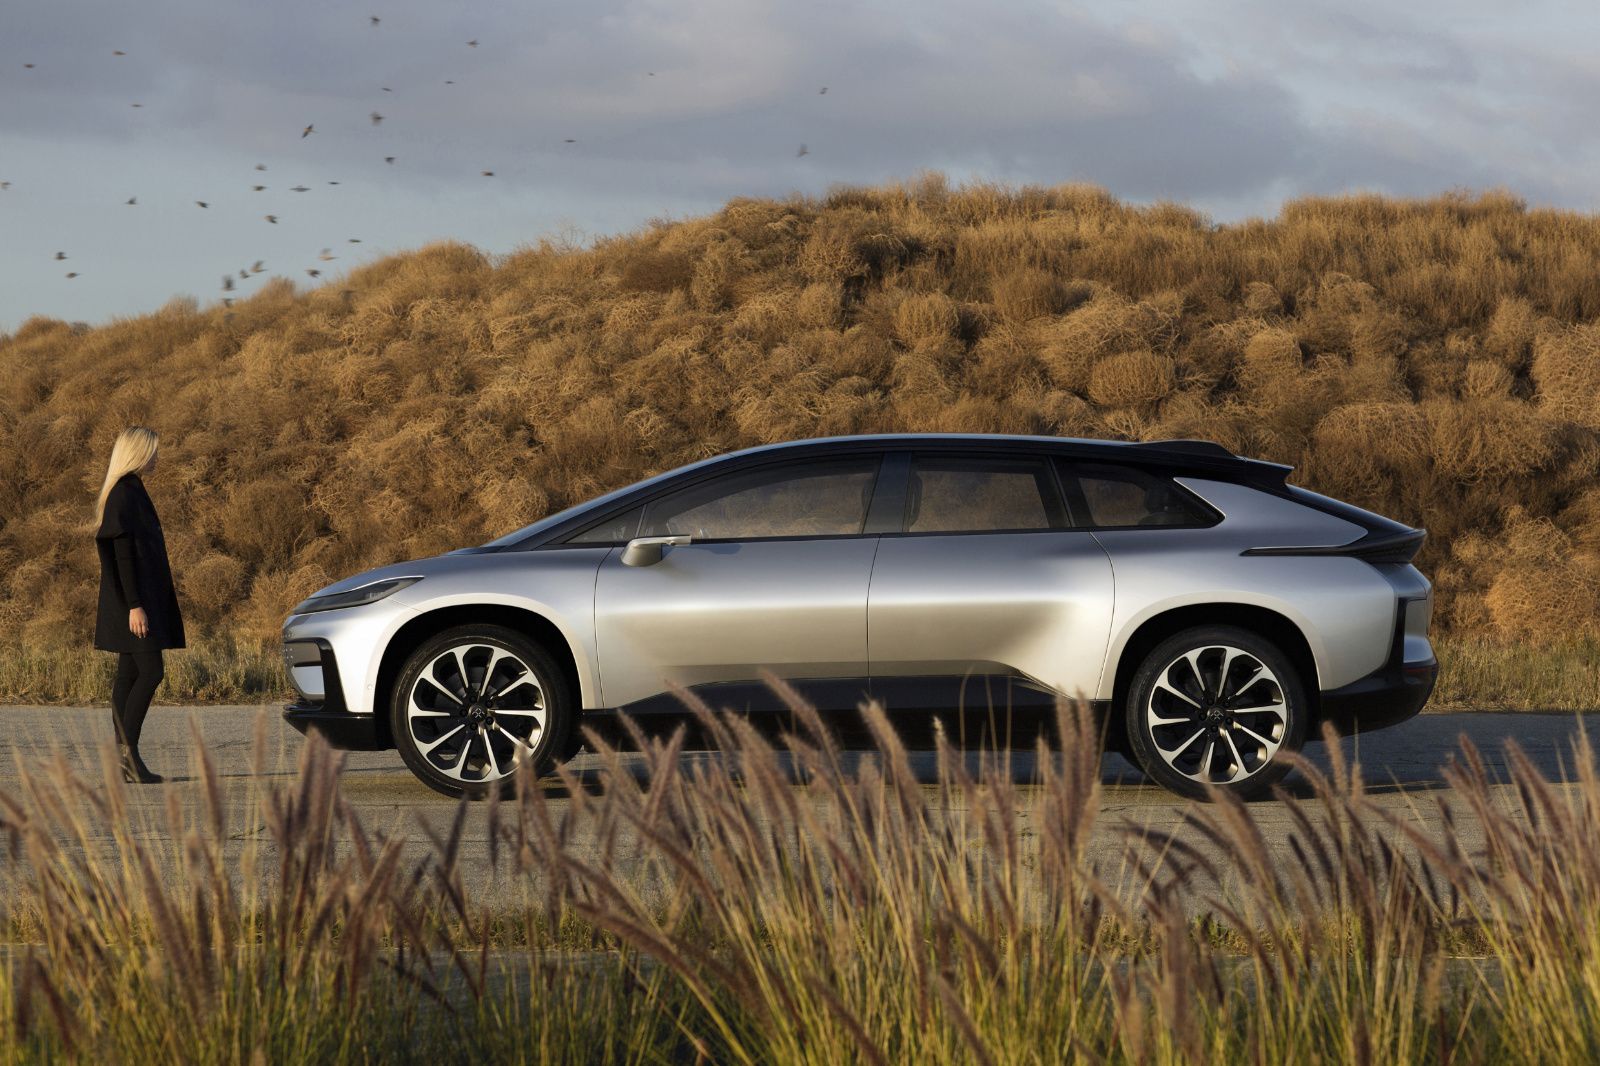 faraday future s first production car ff 91 hits the road in 2018 image 1